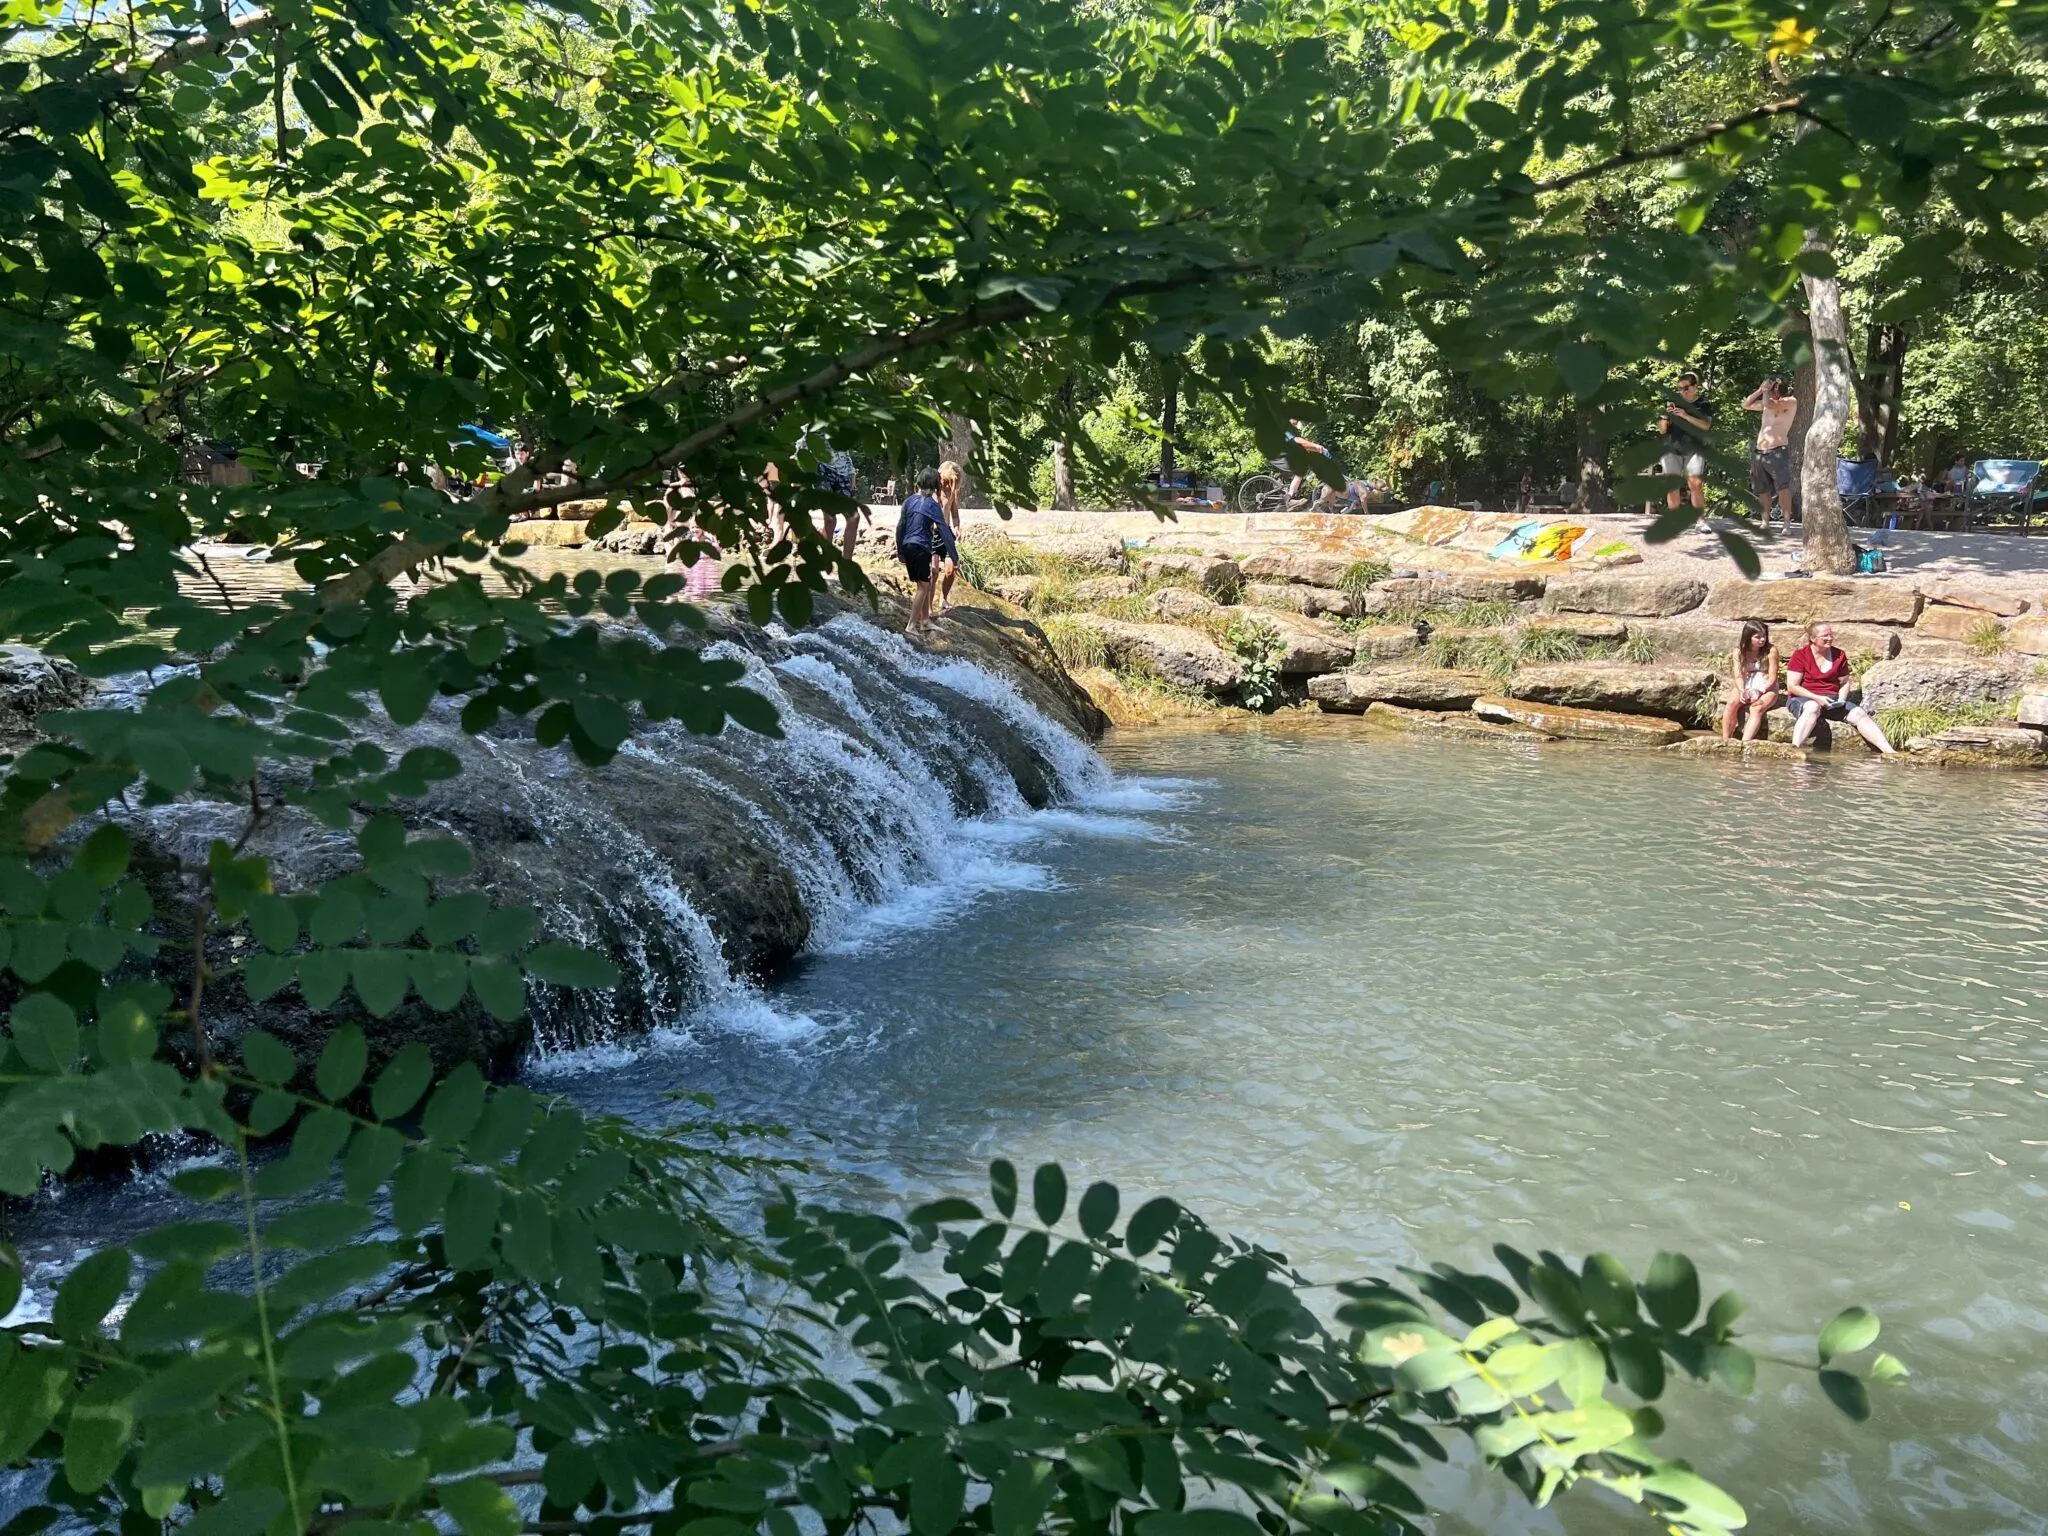 Children playing by a small waterfall